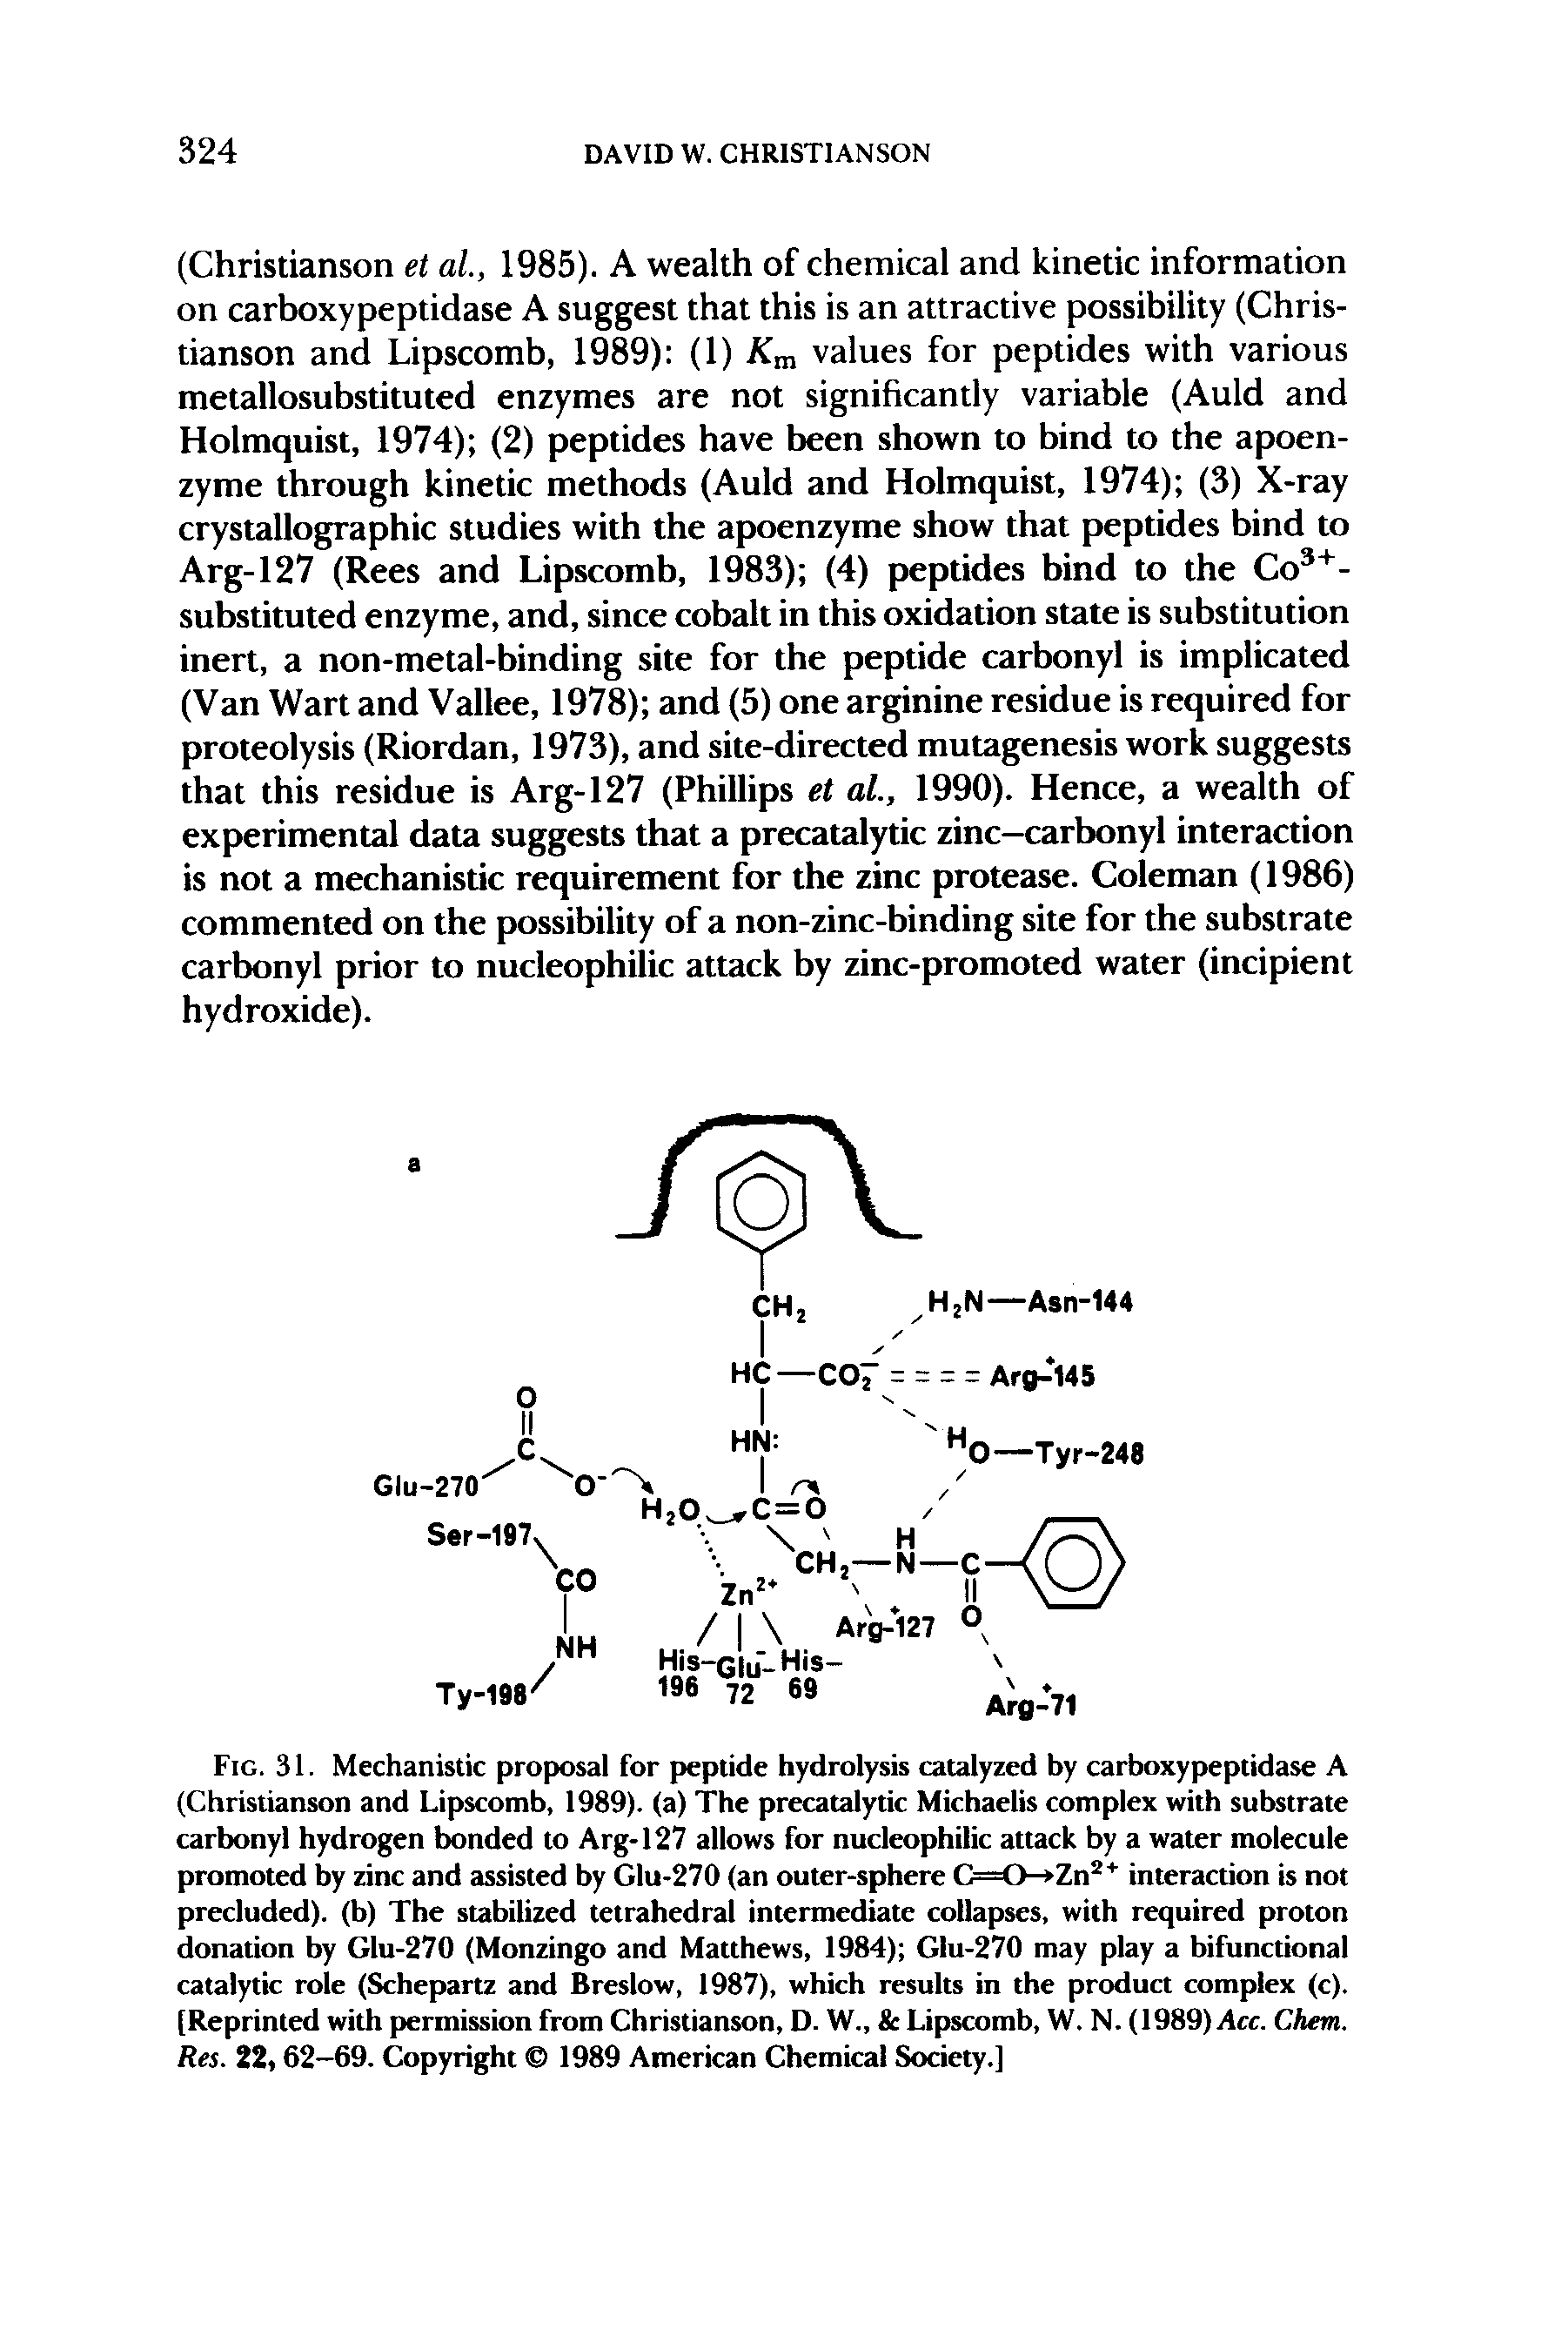 Fig. 31. Mechanistic proposal for peptide hydrolysis catalyzed by carboxypeptidase A (Christianson and Lipscomb, 1989). (a) The precatalytic Michaelis complex with substrate carbonyl hydrogen bonded to Arg-127 allows for nucleophilic attack by a water molecule promoted by zinc and assisted by Glu-270 (an outer-sphere C==O Zn interaction is not precluded), (b) Tbe stabilized tetrahedral intermediate collapses, with required proton donation by Glu-270 (Monzingo and Matthews, 1984) Glu-270 may play a bifunctional catalytic role (Schepartz and Breslow, 1987), which results in the product complex (c). [Reprinted with permission from Christianson, D. W., Lipscomb, W. N. (1989) Acc. Chem. Res. 22,62-69. Copyright 1989 American Chemical Society.]...